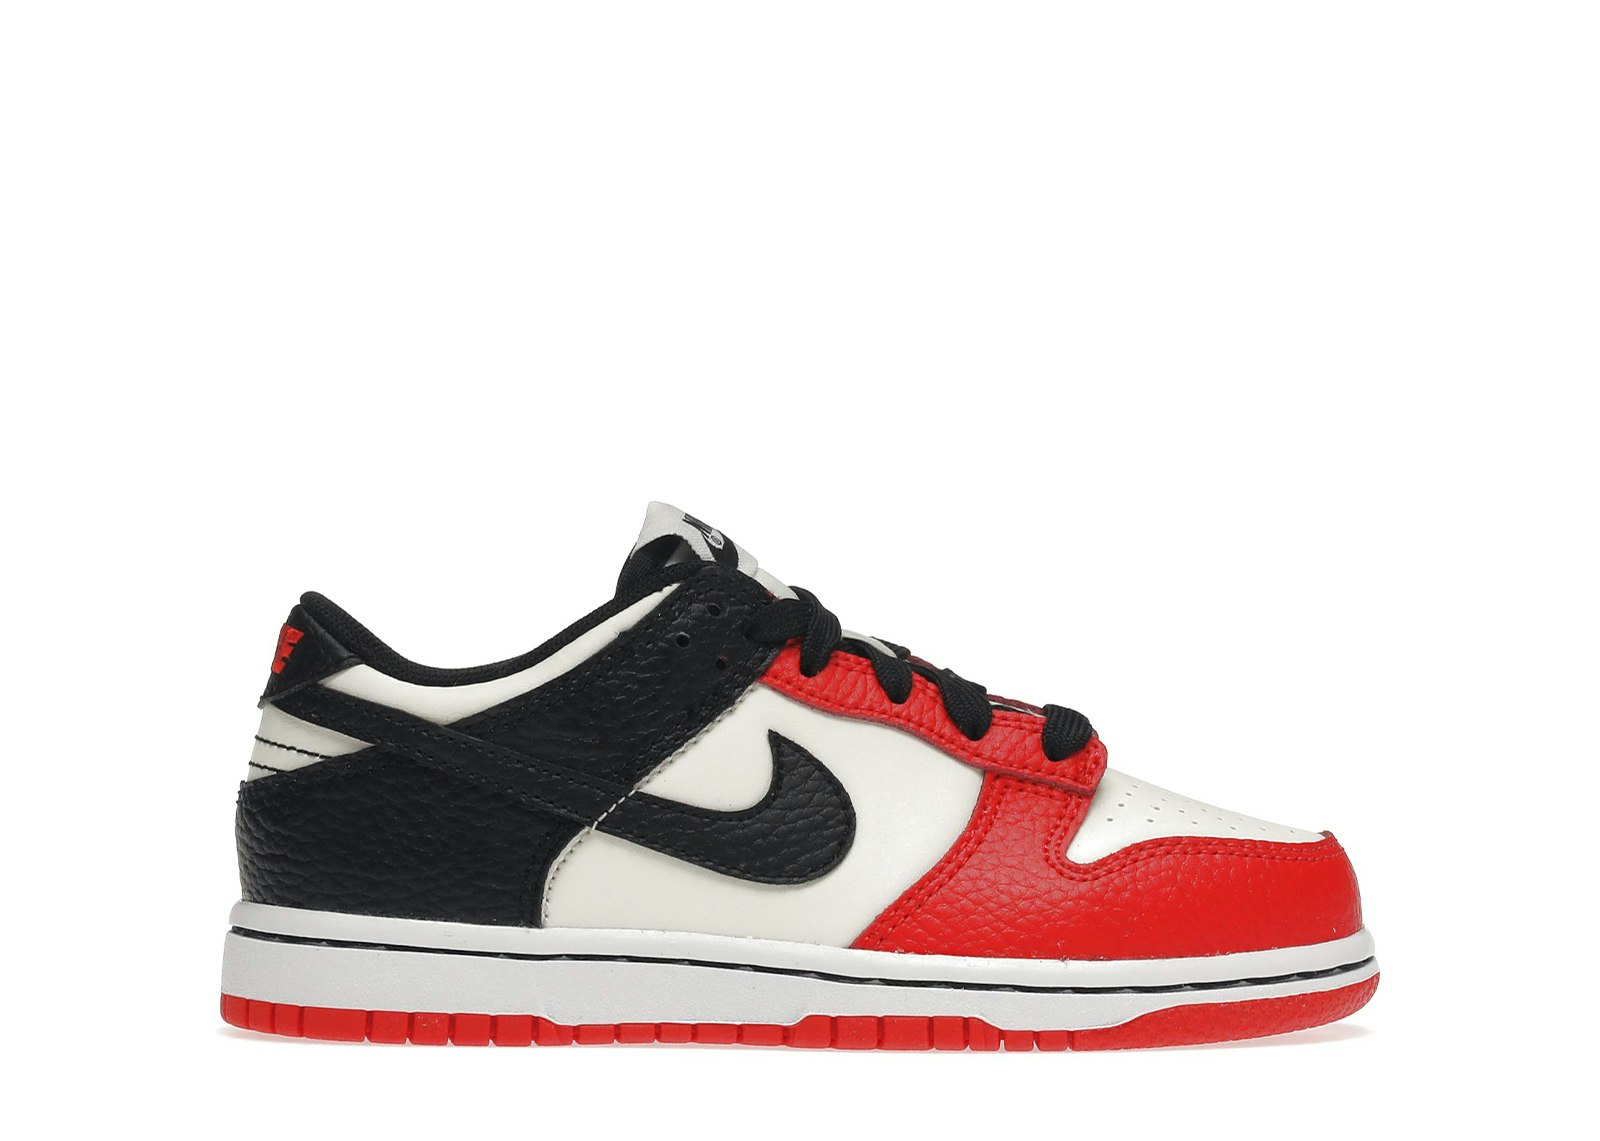 NIKE DUNK LOW - SAIL/BLACK-CHILE RED NBA (PS)